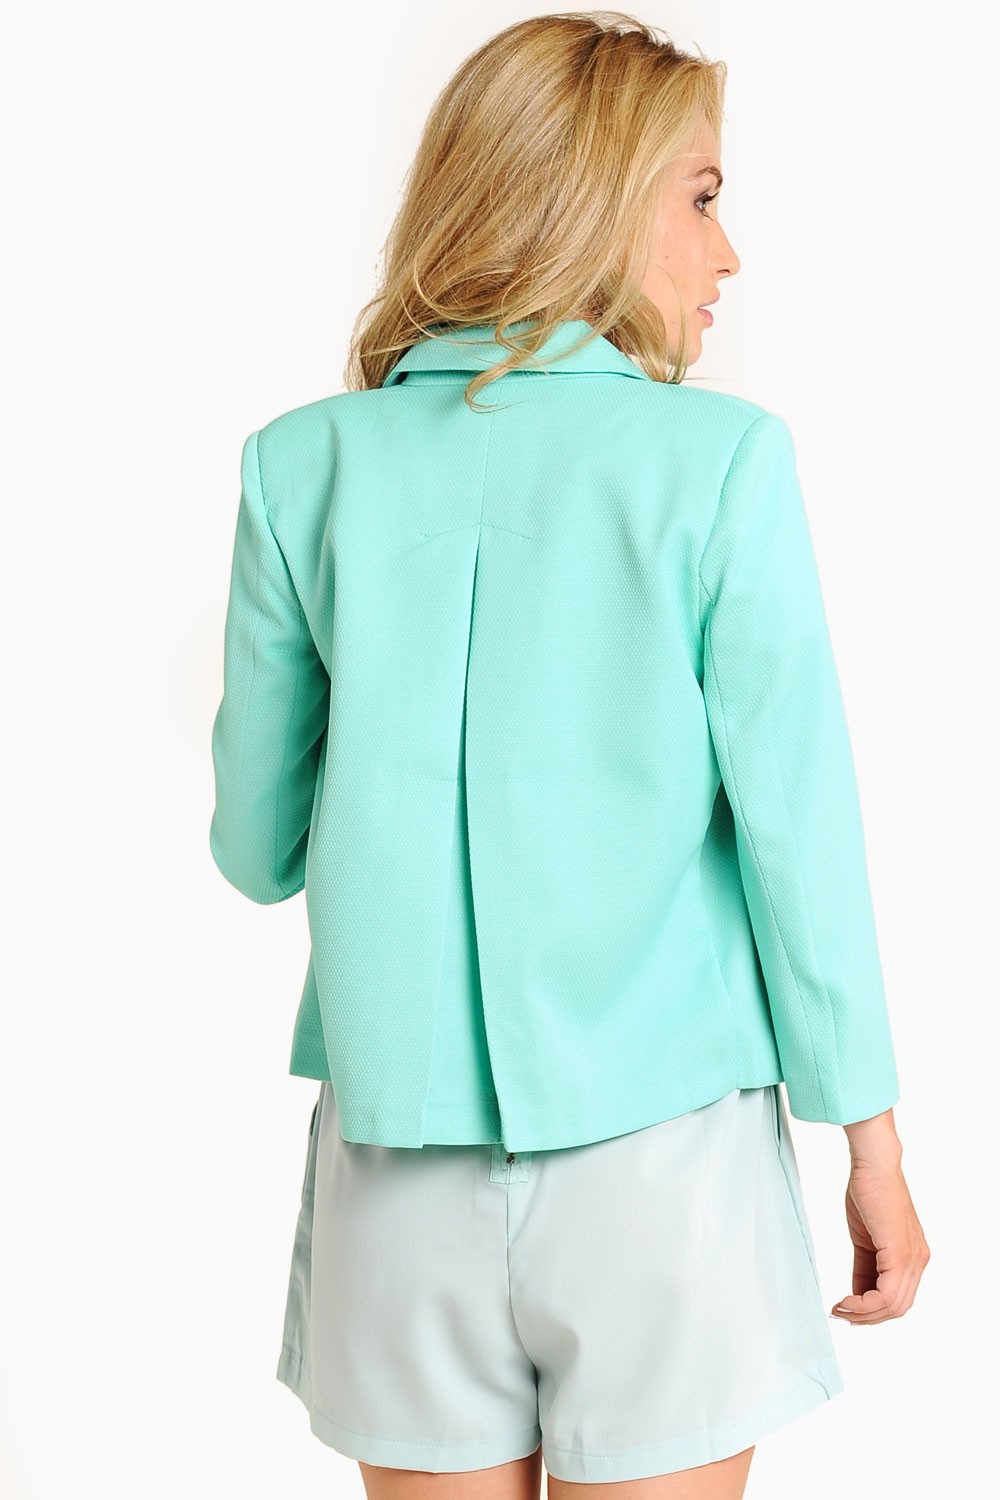 Marc Angelo Mandy Jacket in Mint | iCLOTHING